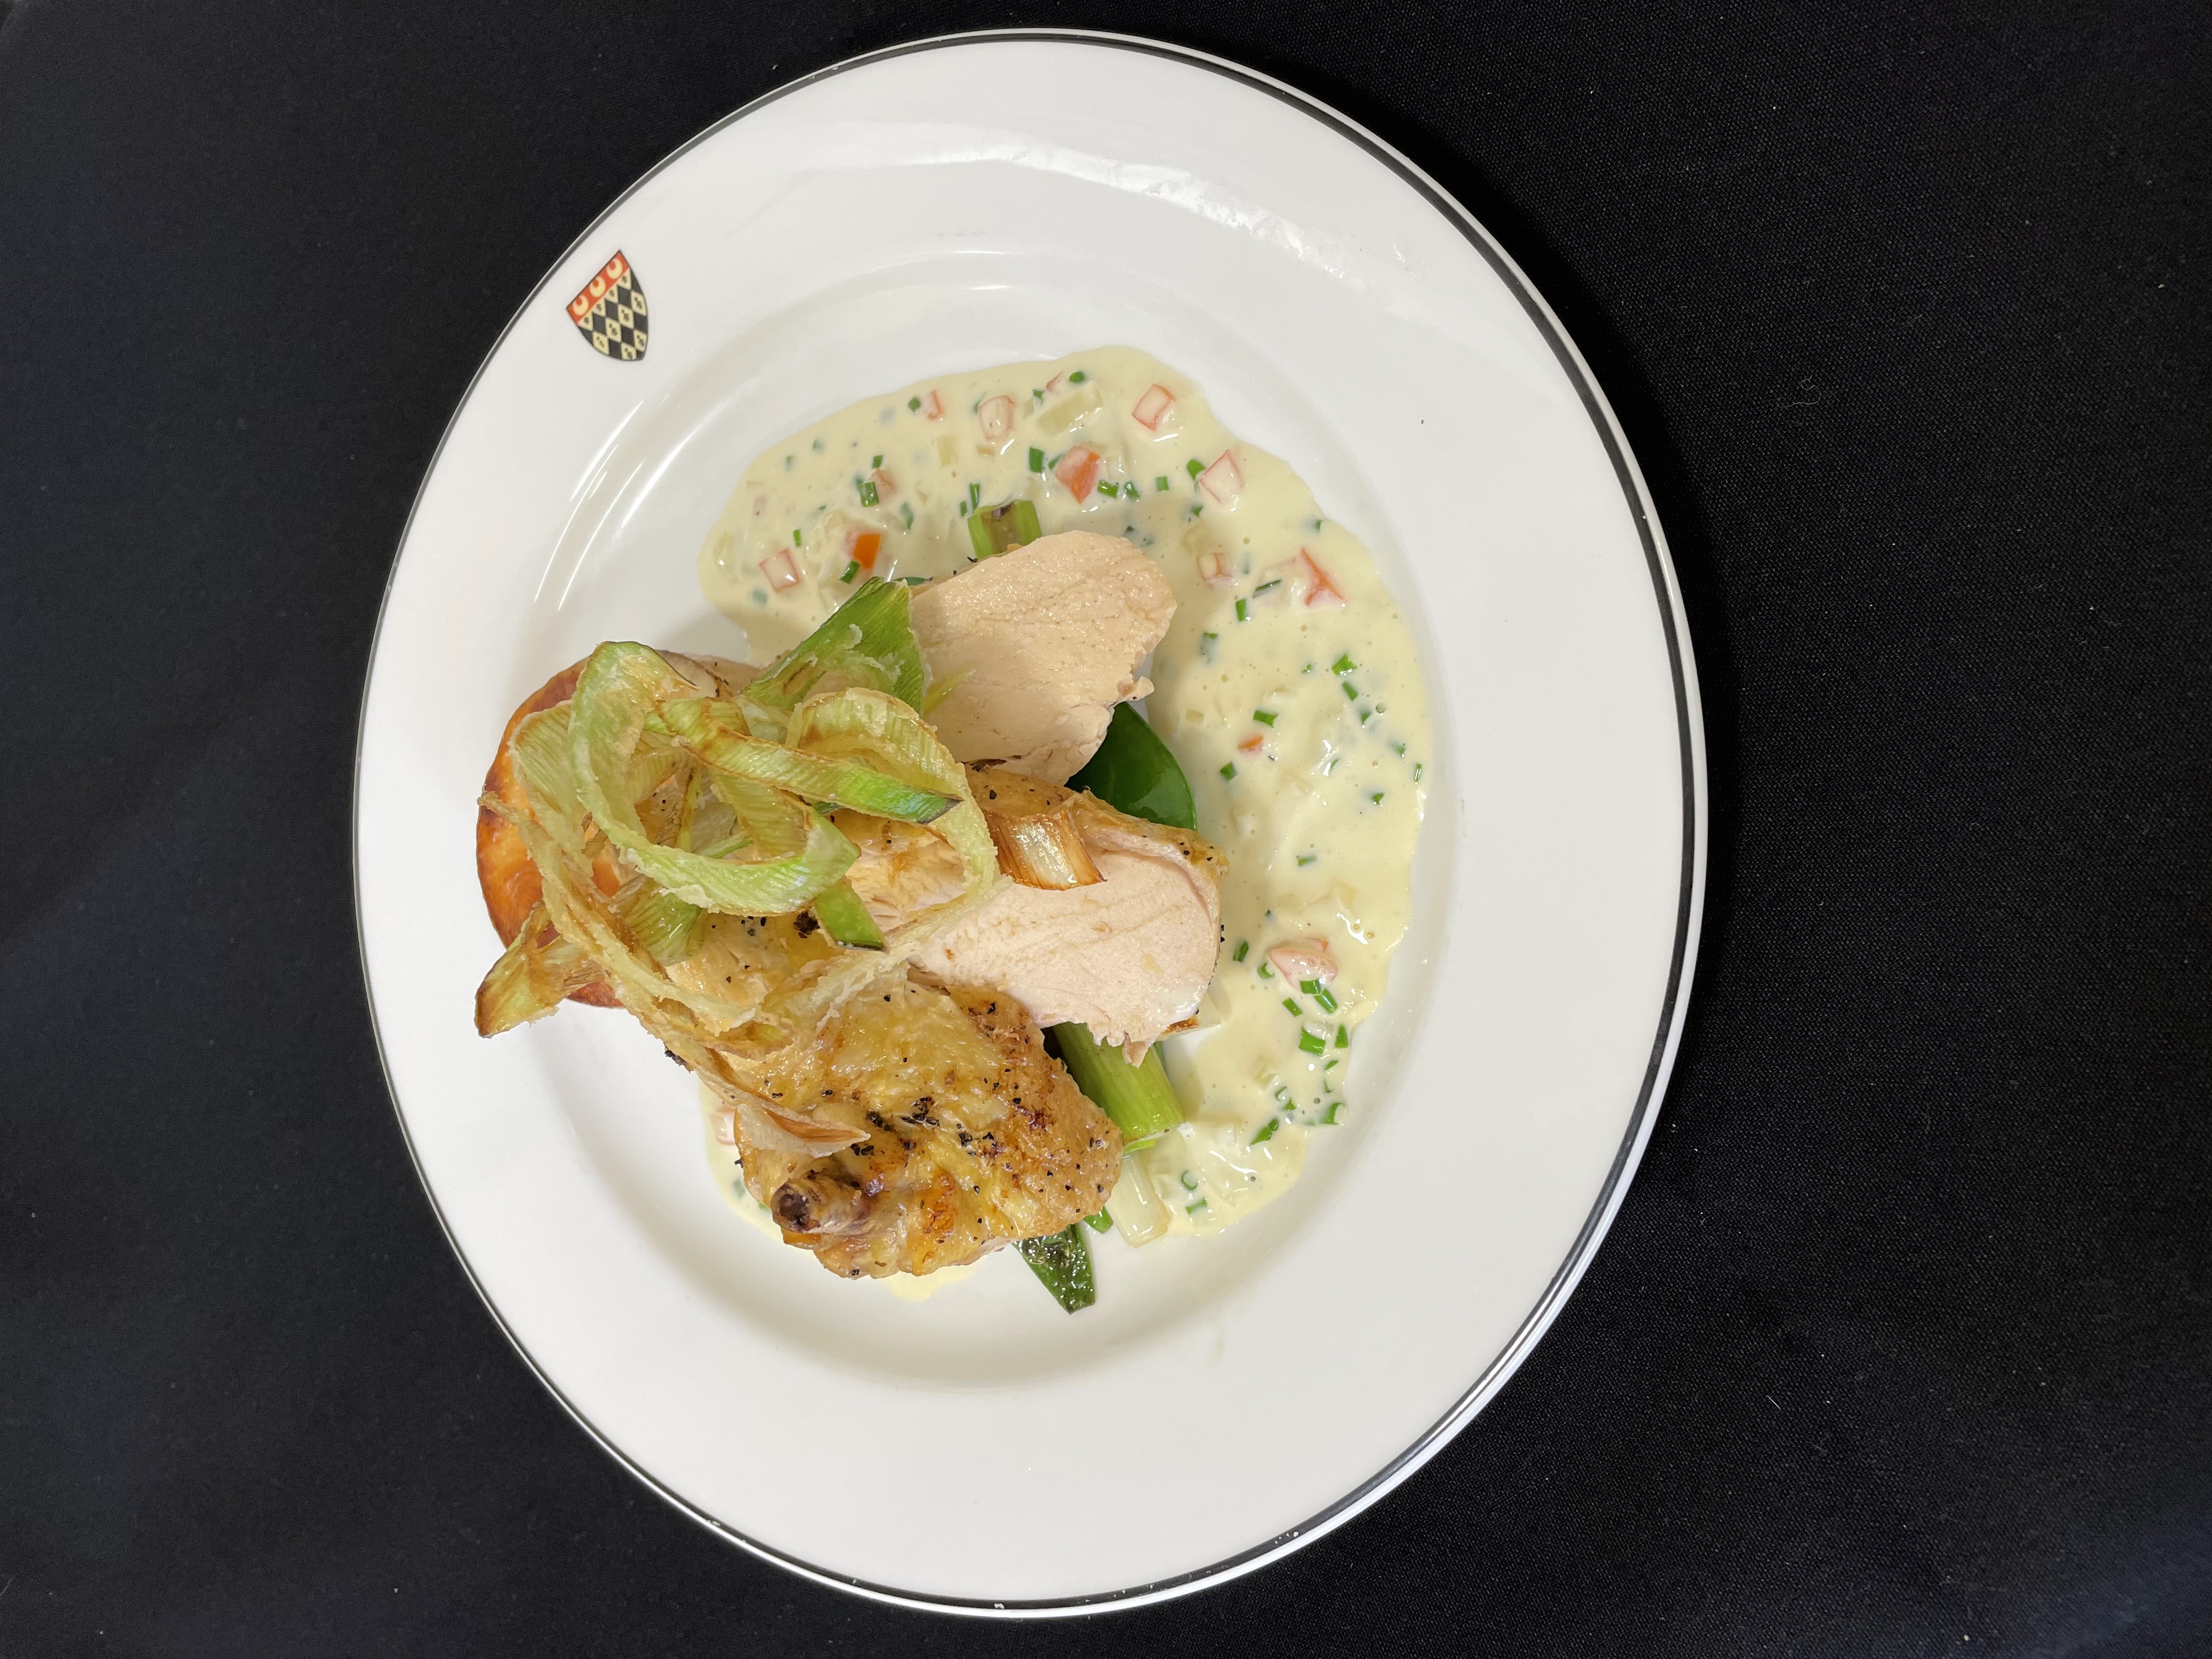 Pan fried corn fed chicken served with a white wine butter sauce and baby vegetables